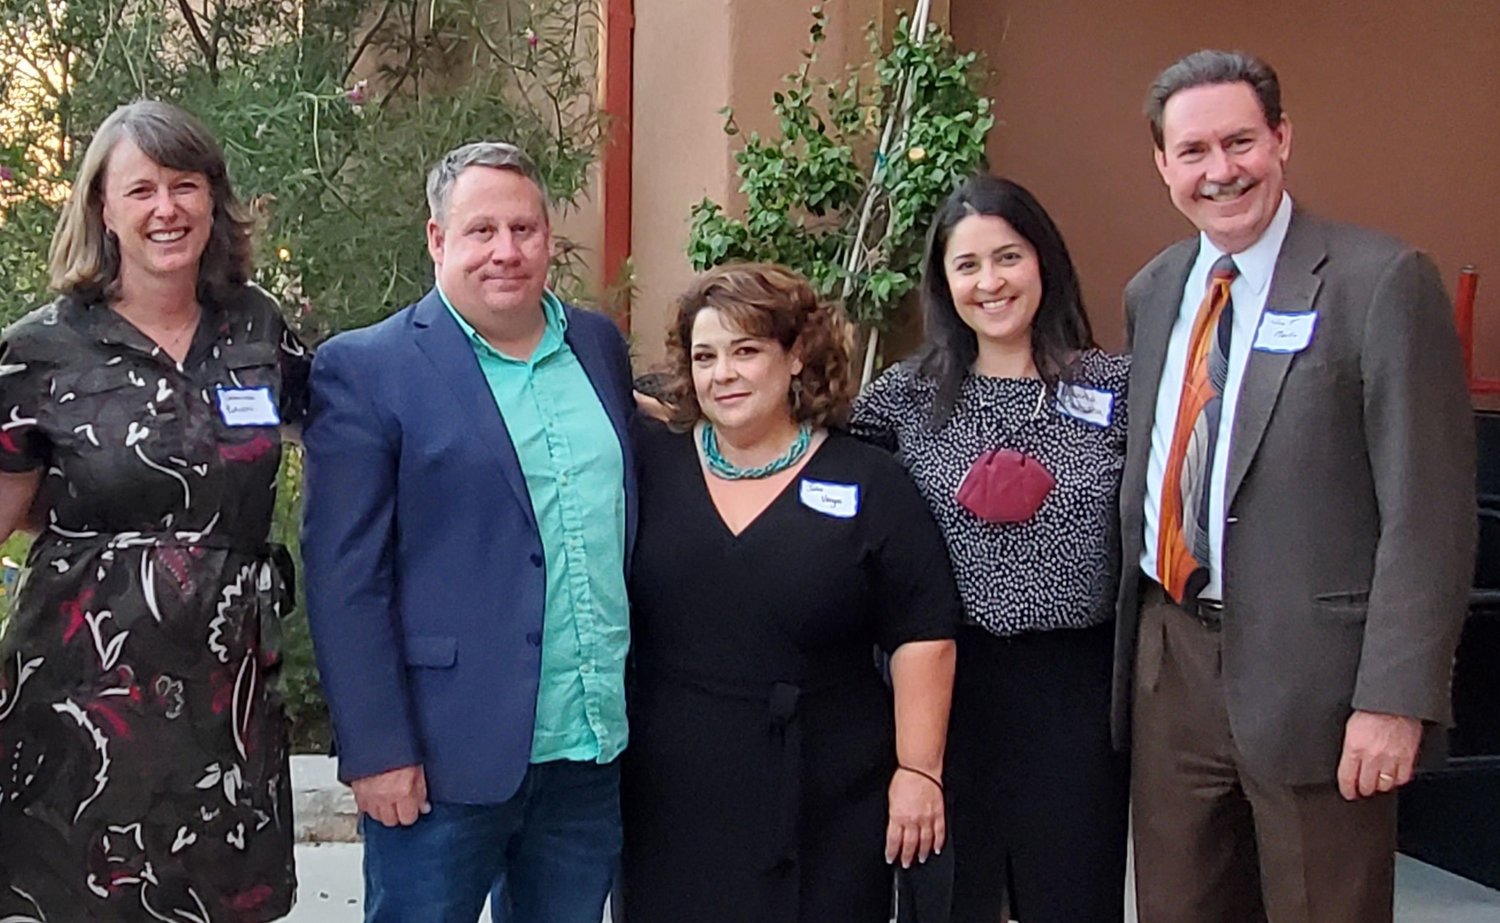 At a recent Doña Ana County Bar Association meeting are, left to right, New Mexico Supreme Court Justice Shannon Bacon, Third Judicial District Court Judge Casey Fitch, New Mexico Supreme Court Justices Julie Vargas and Briana Zamora and Third Judicial District Court Judge James T. Martin.